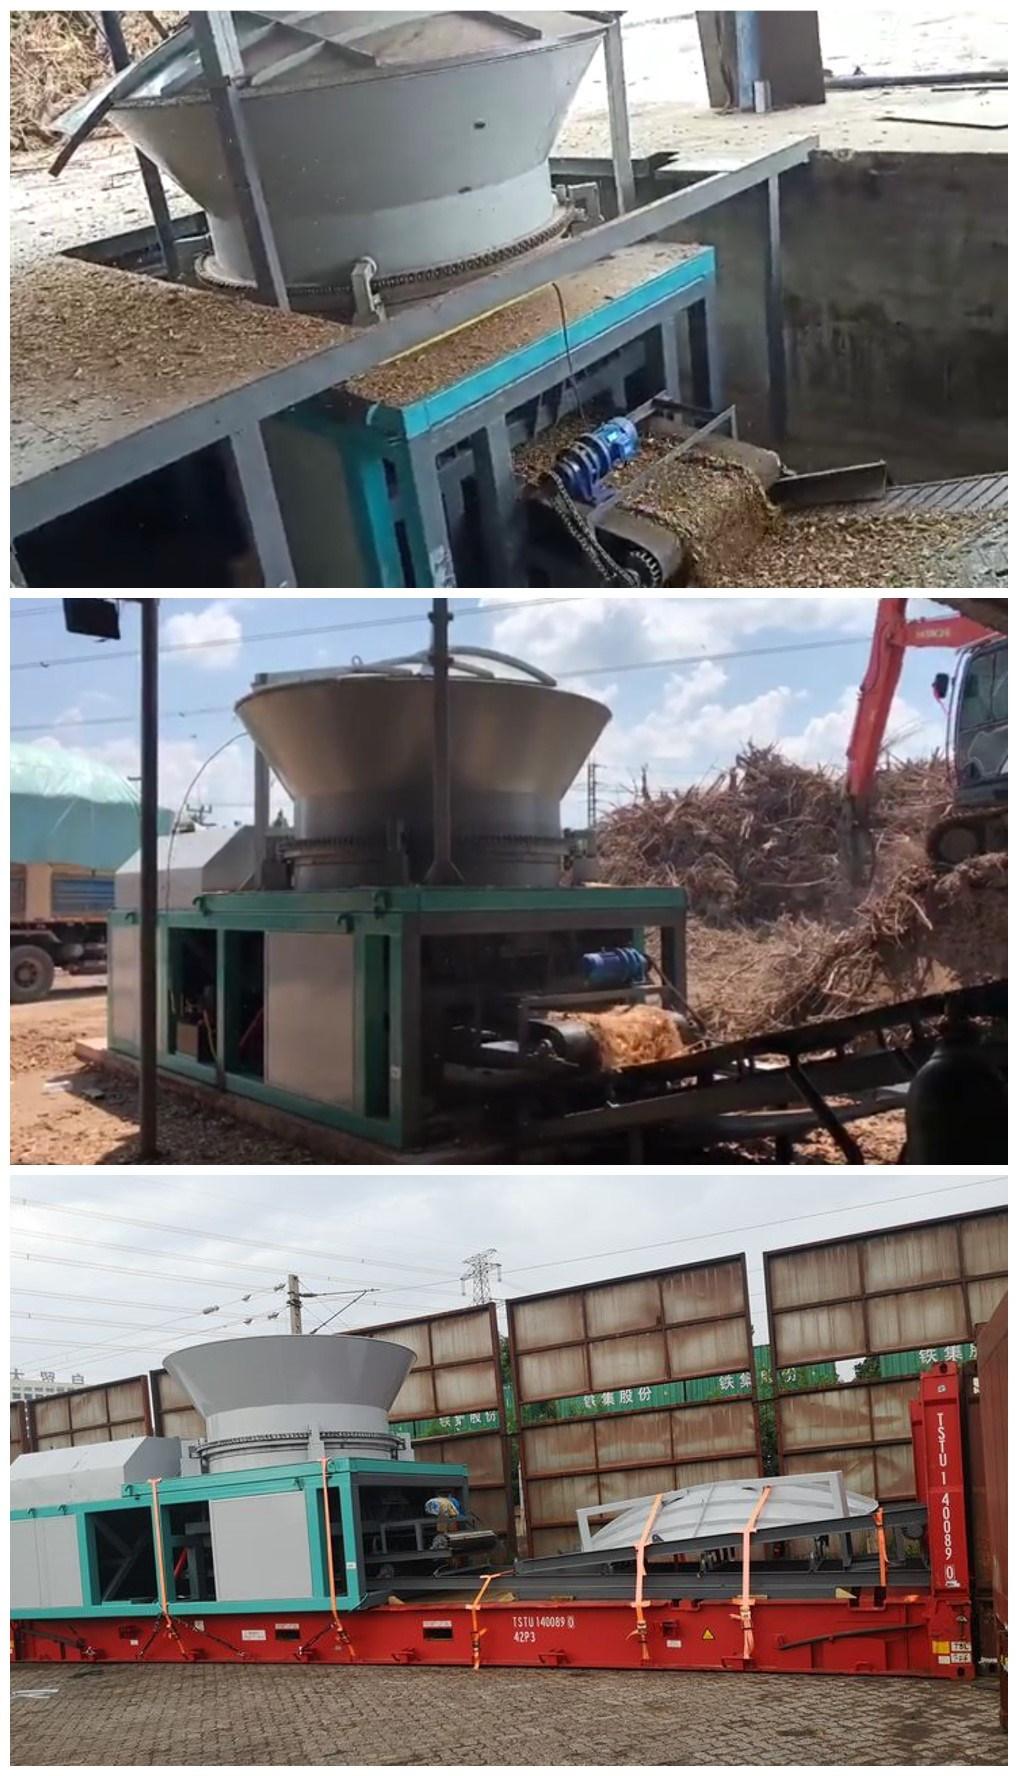 Hot Sale Burning Fuel Production Crusher Shredder Machine Drum Industrial Wood Chipper for Large Wood Chipping Wood